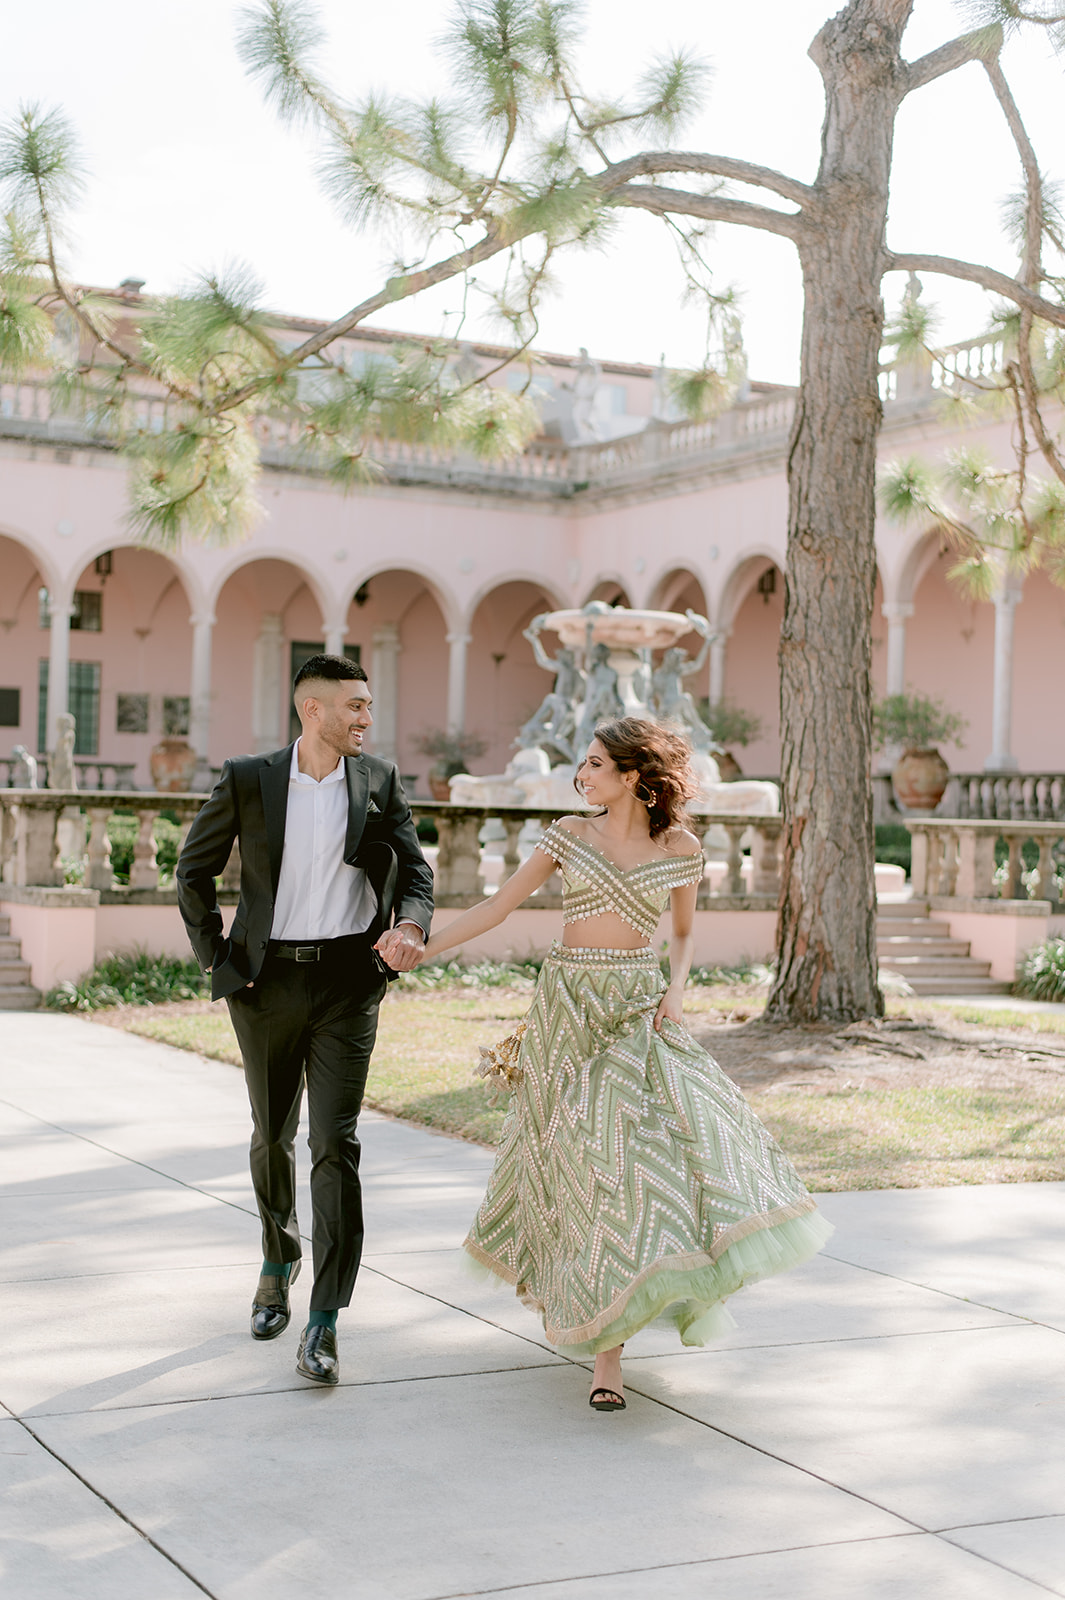 "Indian engagement session with the picturesque Ca' d'Zan mansion at the Ringling Museum"
